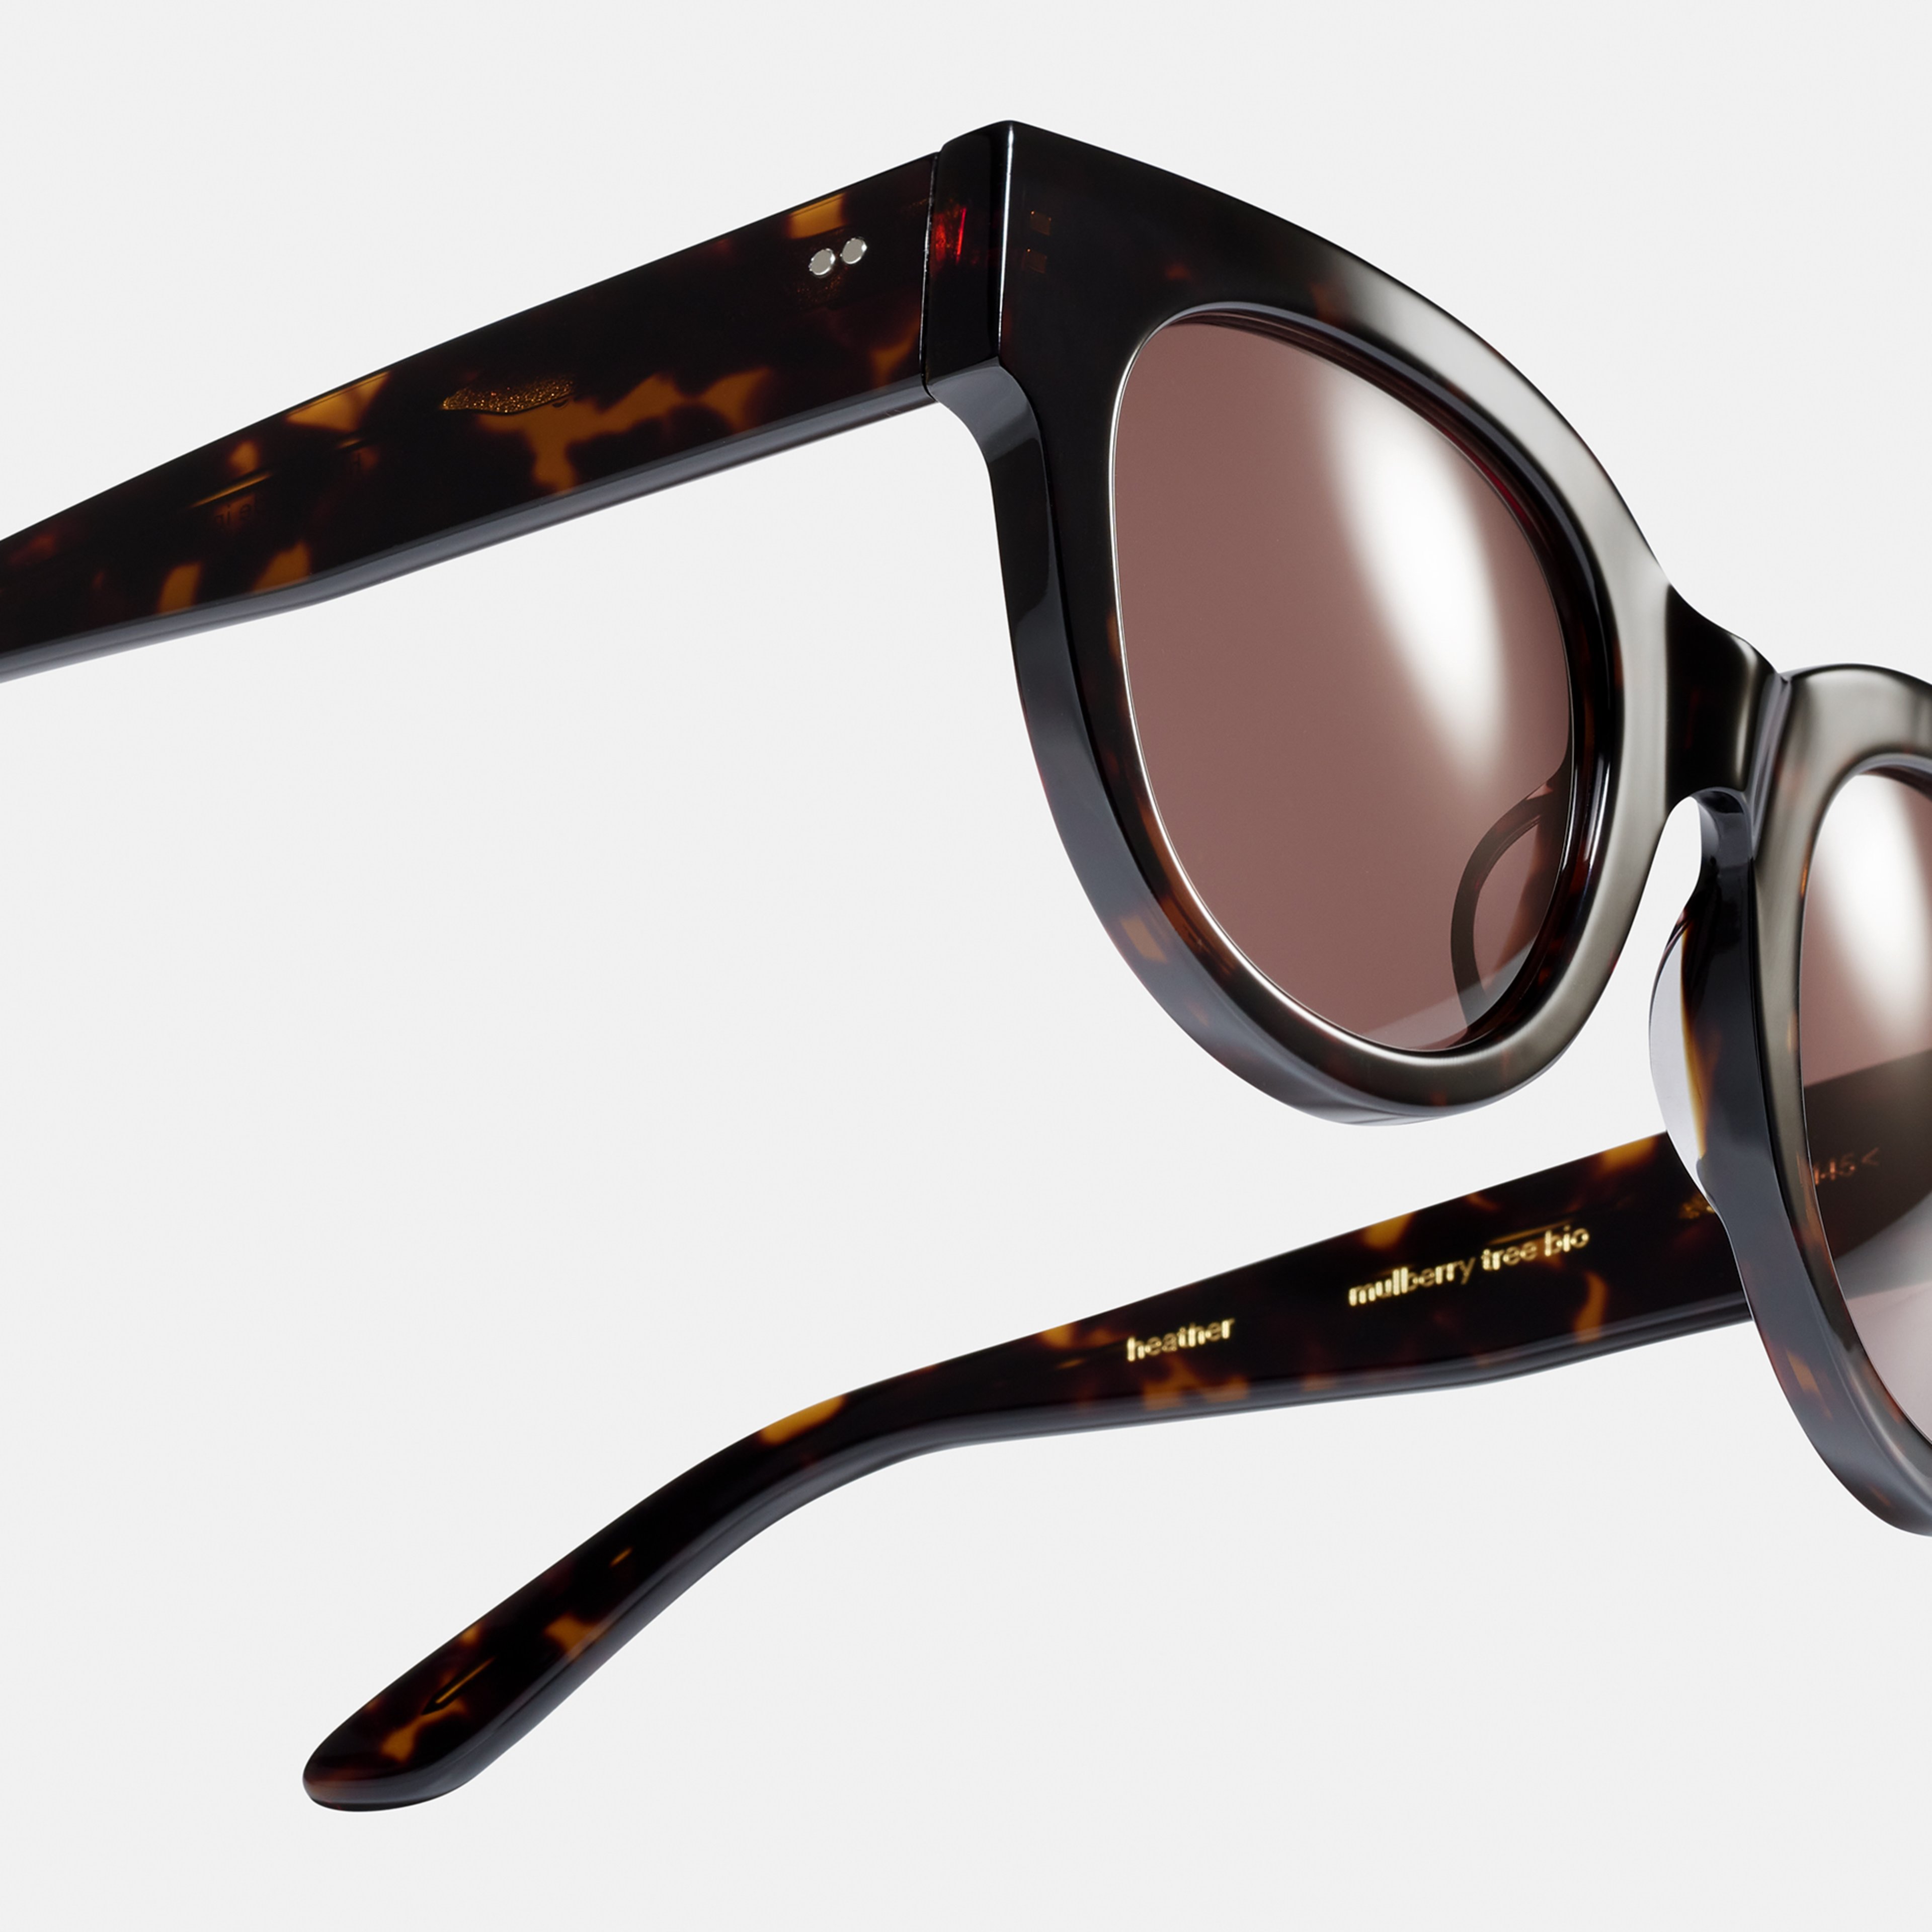 Ace & Tate Solaires | ronde Acétate in tortoise